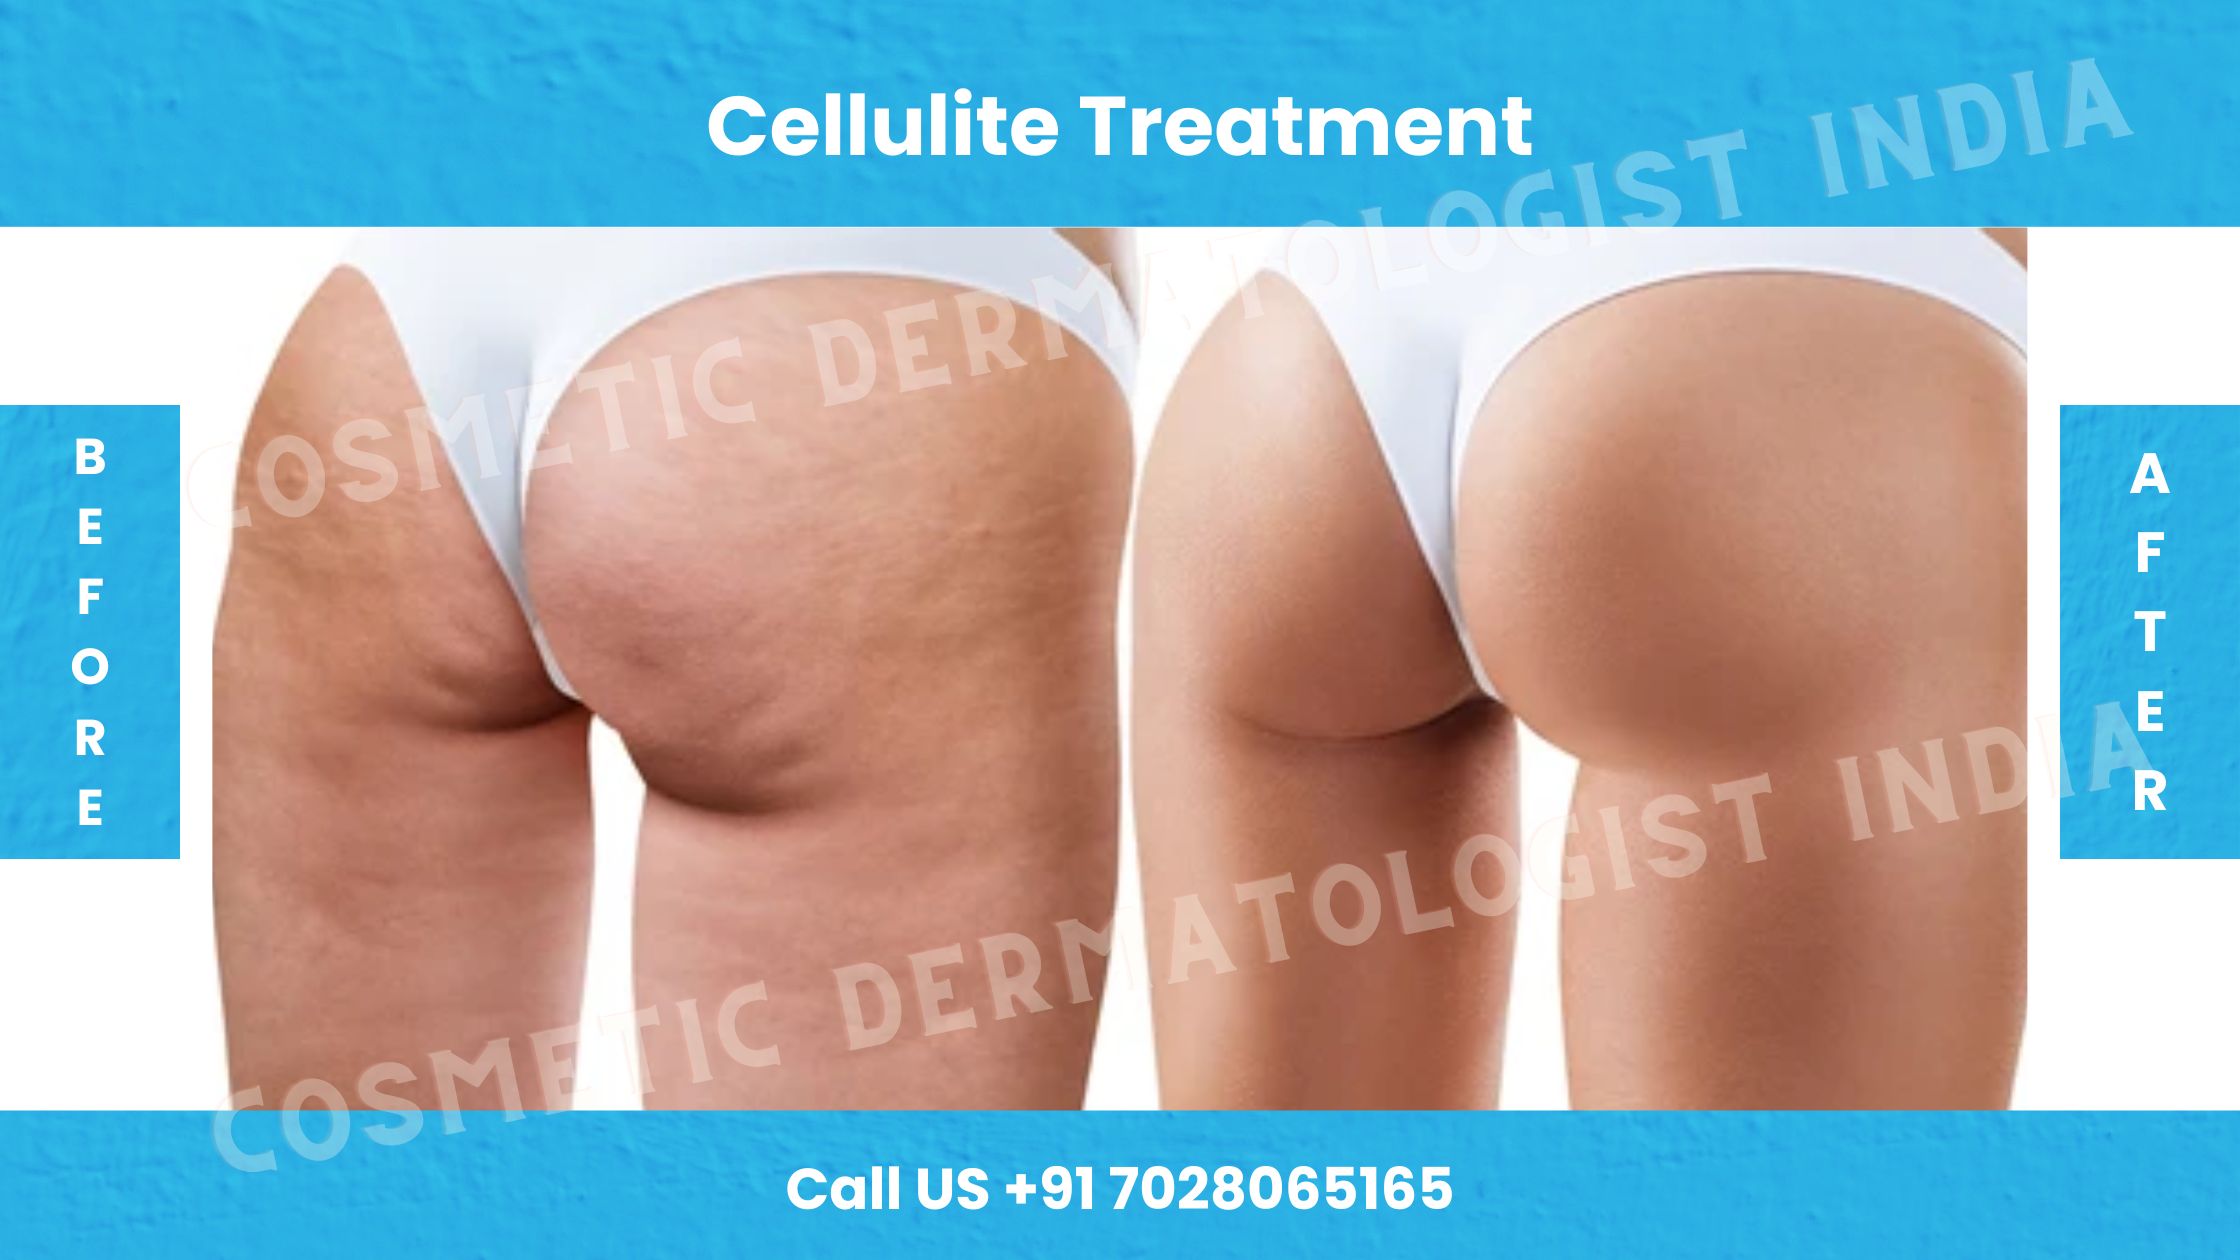 Before and After images of Cellulite treatment